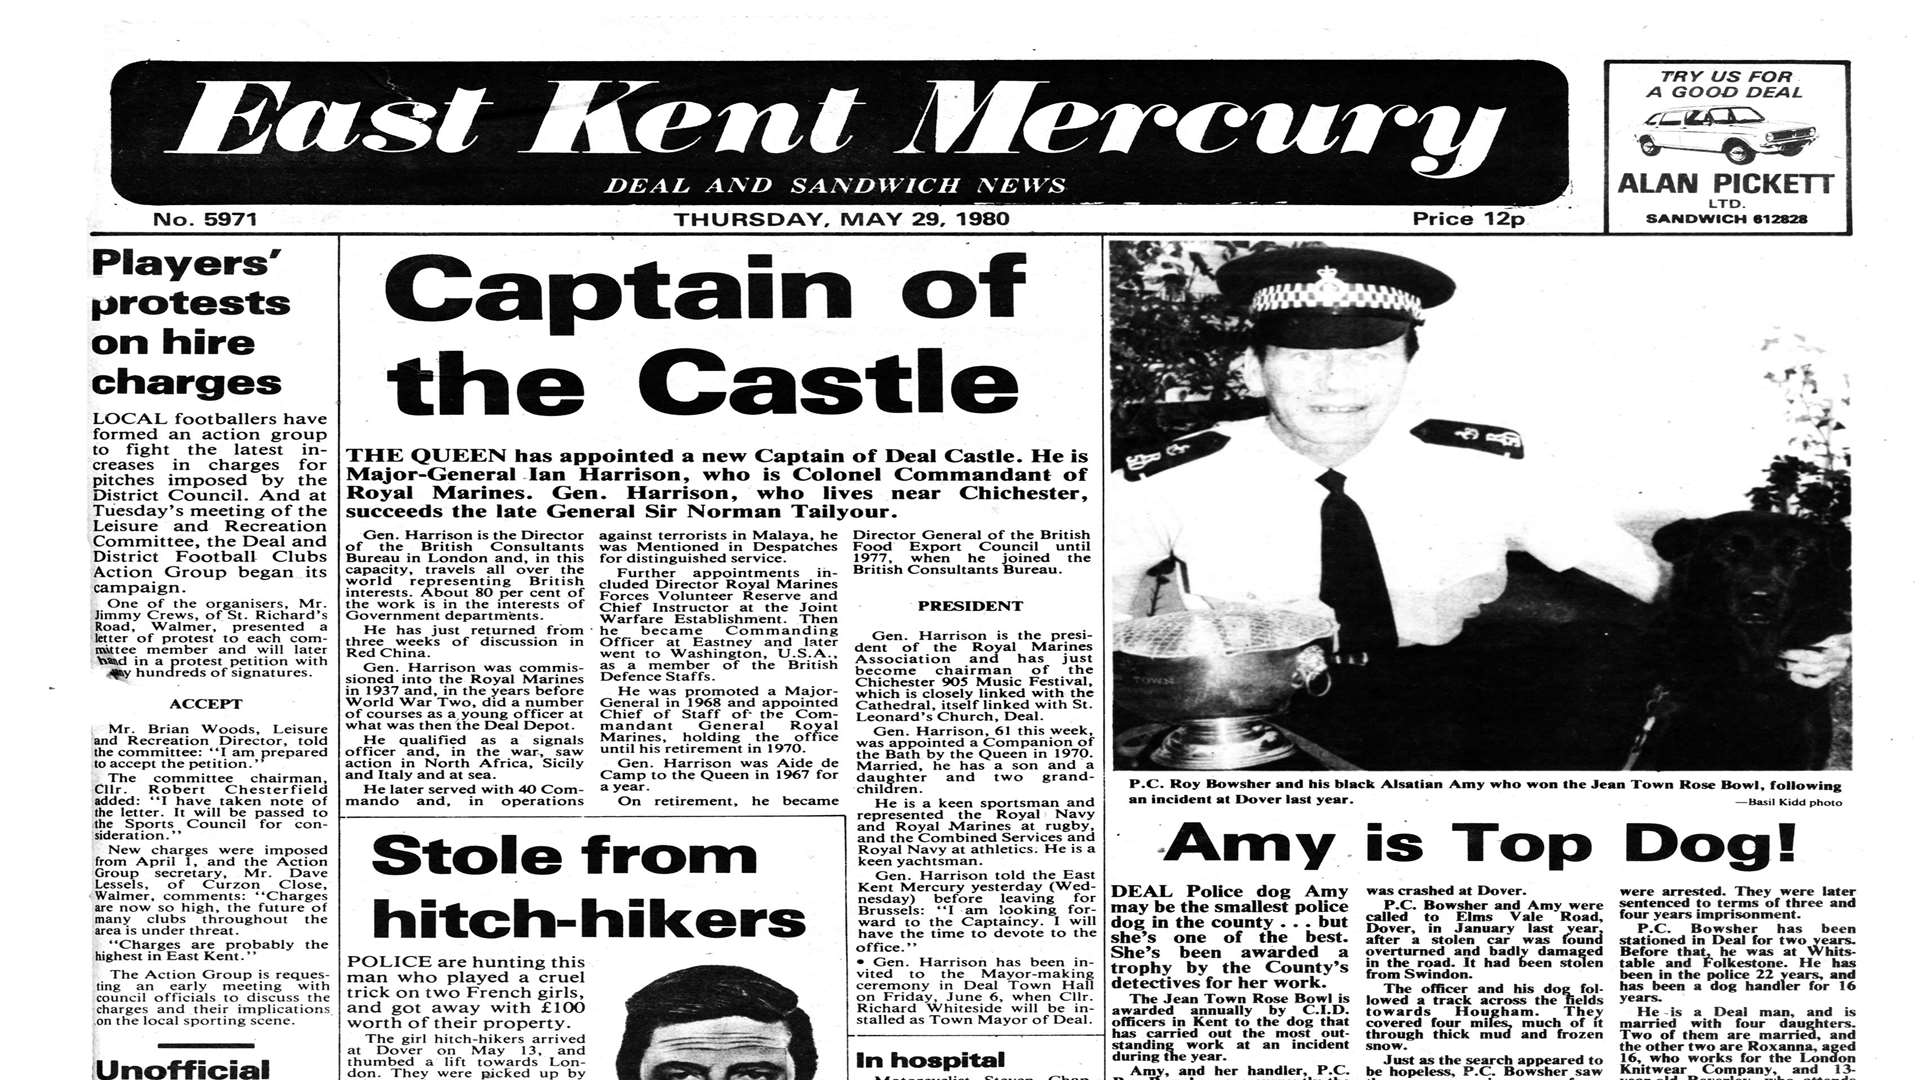 May 29, 1980 - the Mercury is taken over by the Kent Messenger Group